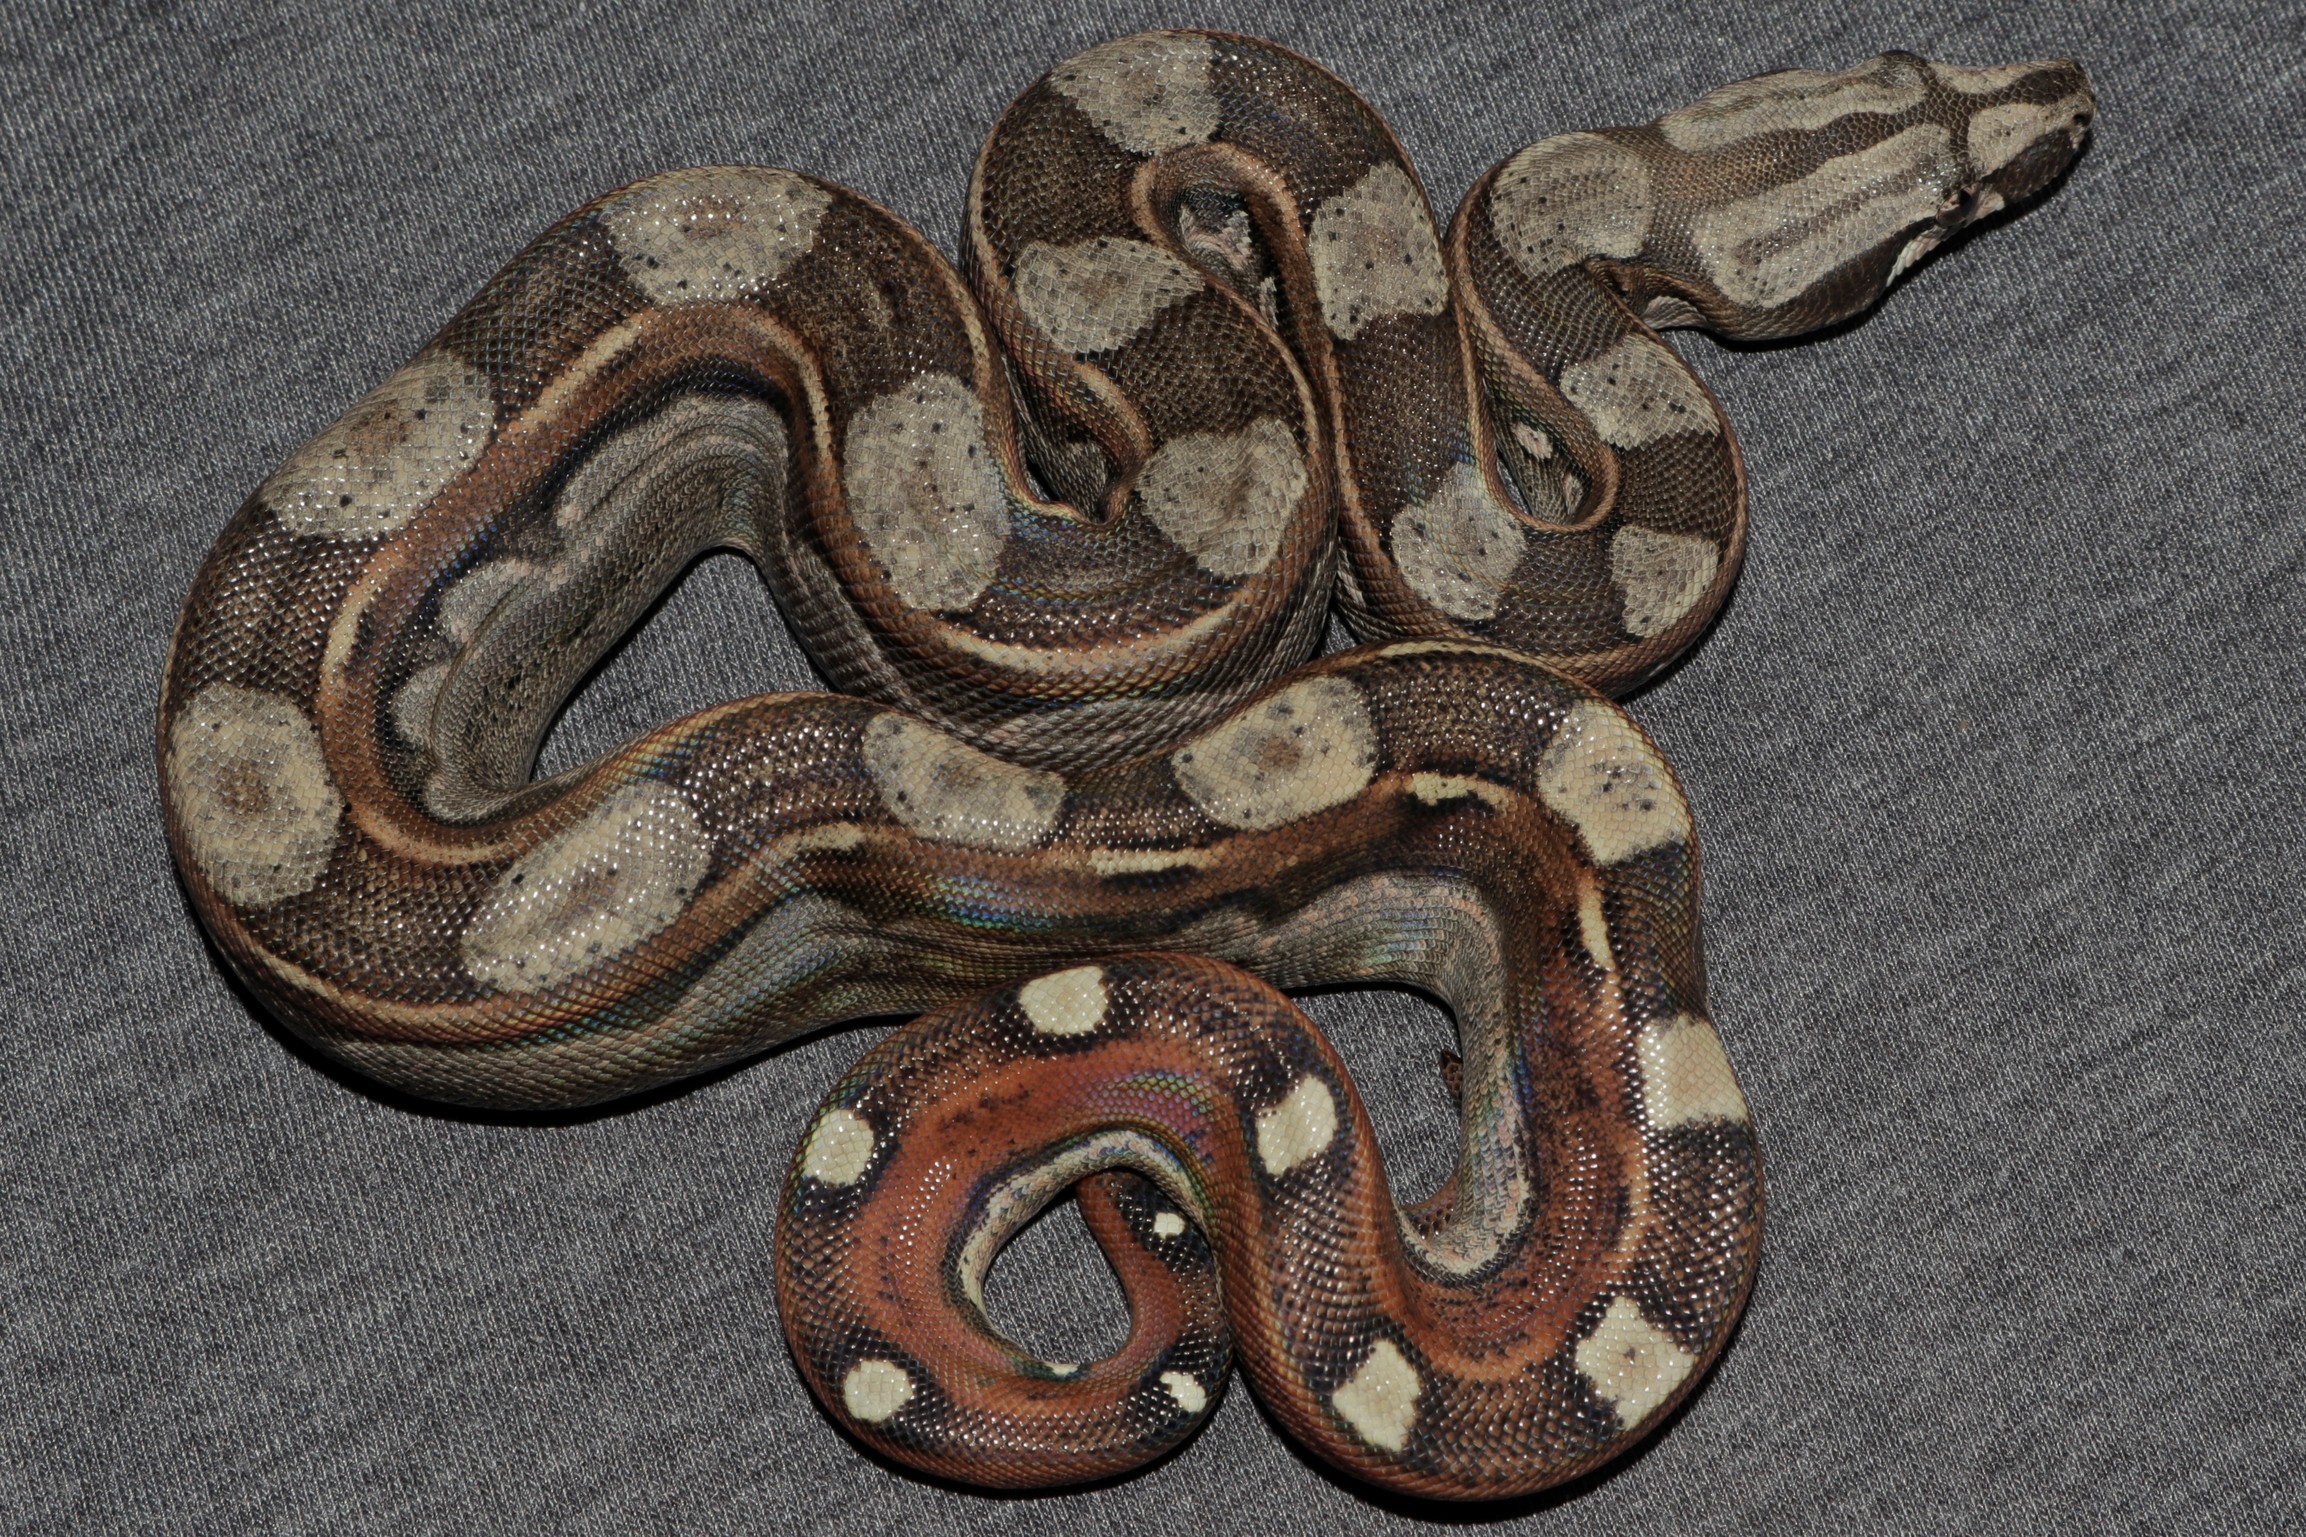 Super Inca Boa Constrictor by Kevin Hasley